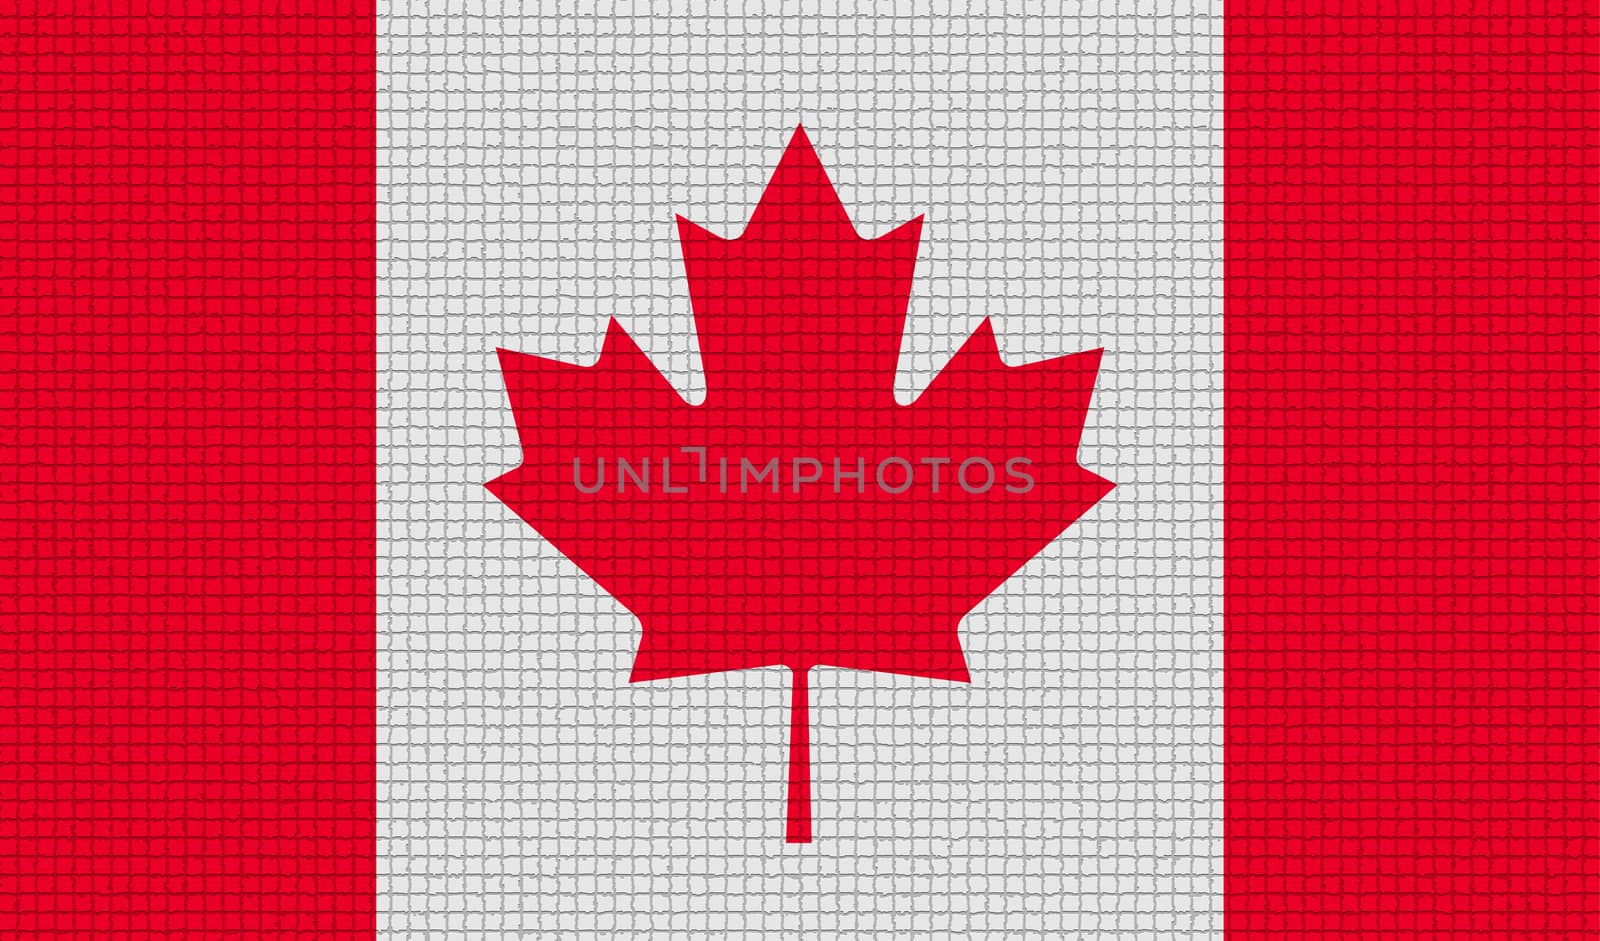 Flags of Canada with abstract textures. Rasterized version